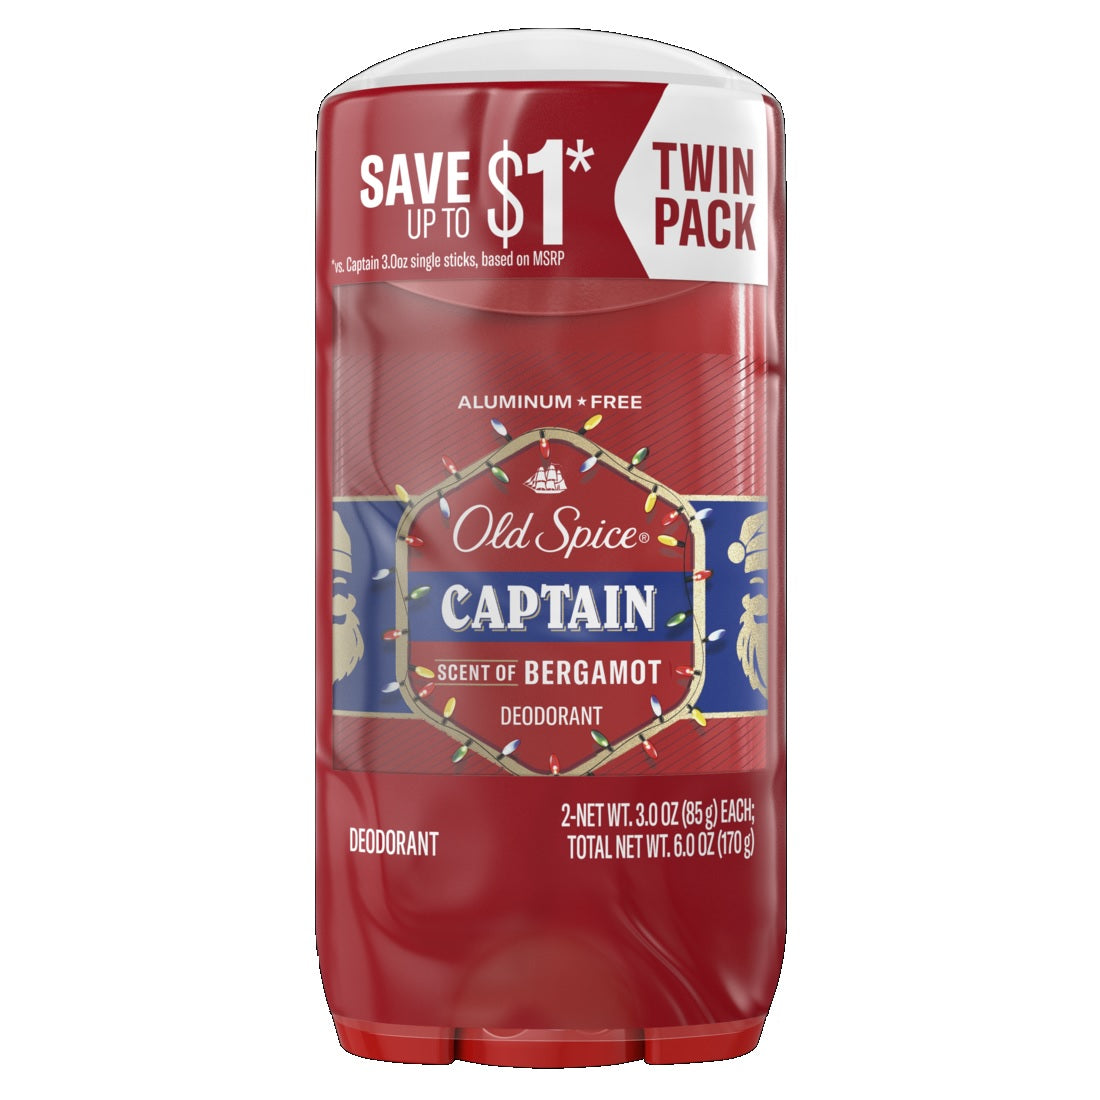 Old Spice Men's Holiday Twin Pack Captian Deodorant - 3oz/6pk